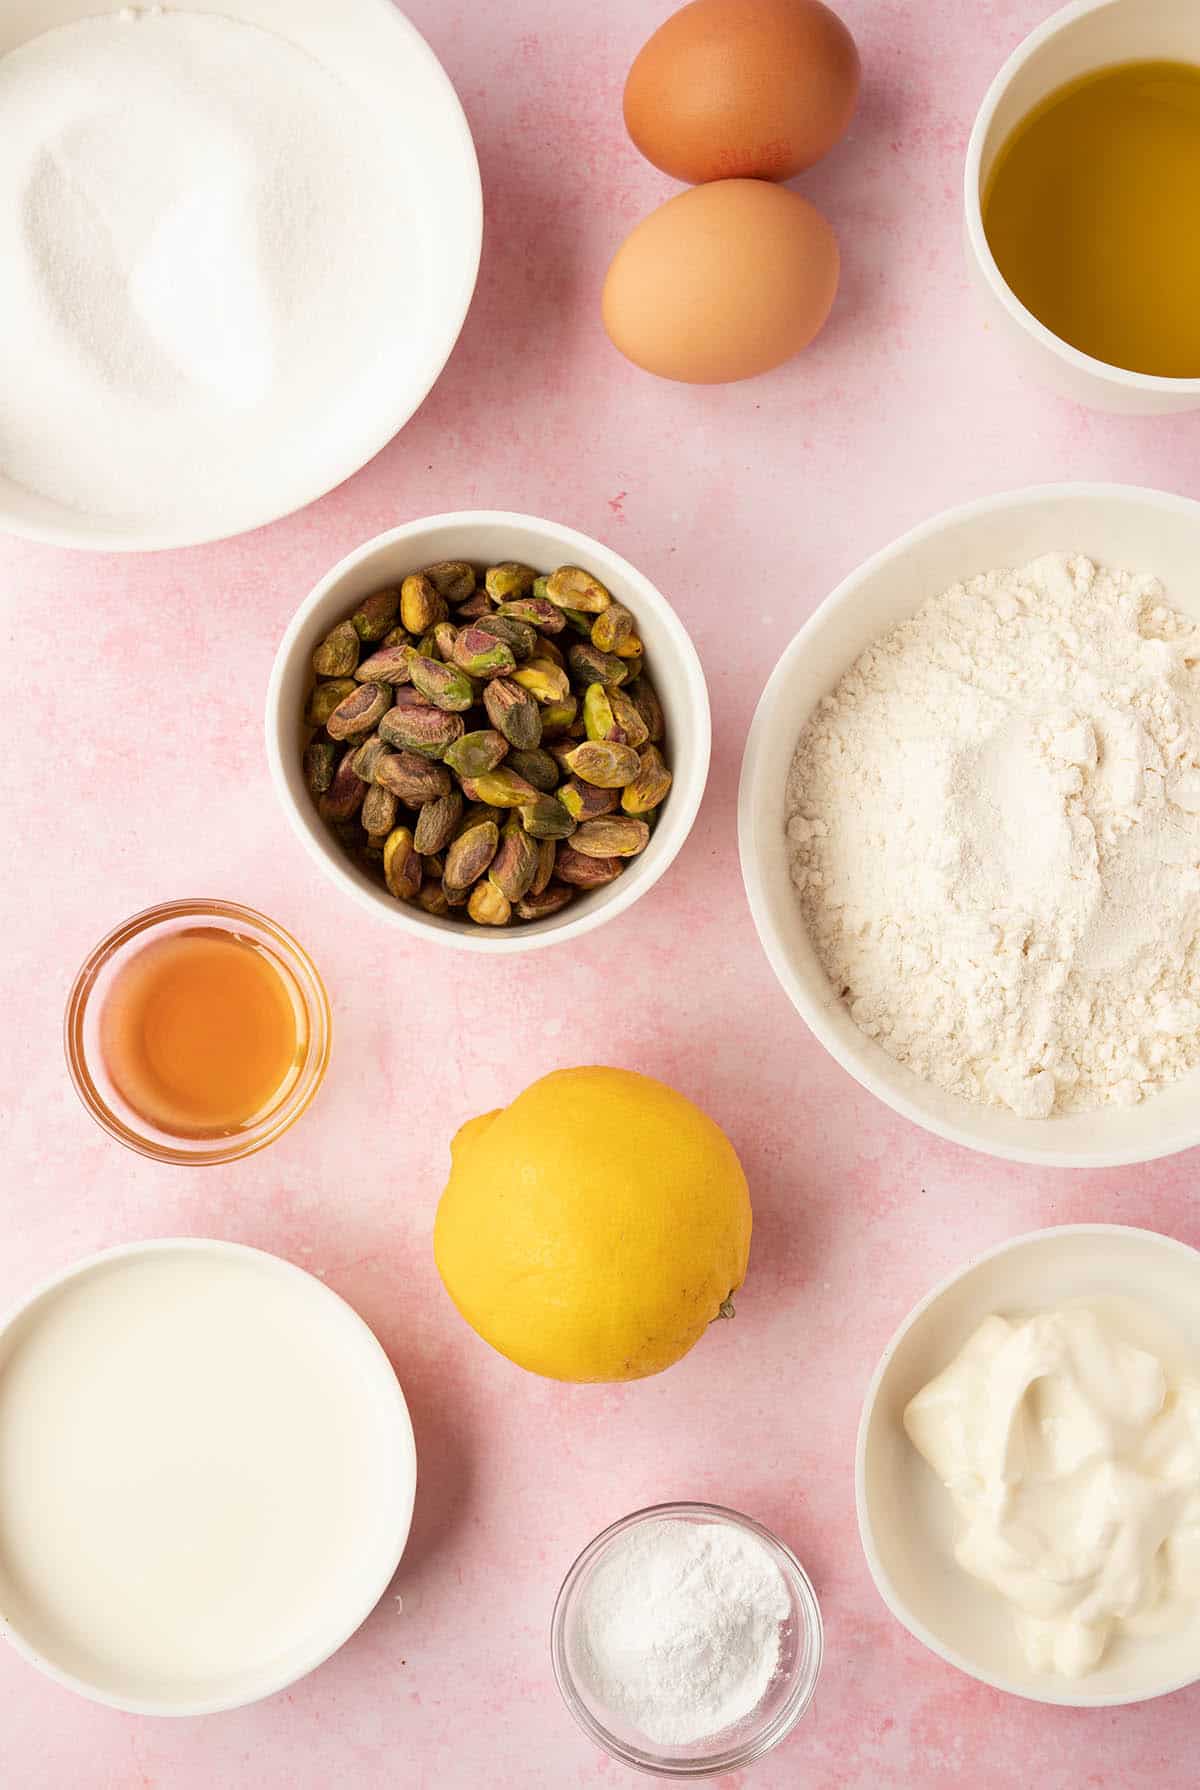 All the ingredients you need to make a Pistachio Cake from scratch sitting on a pink background.